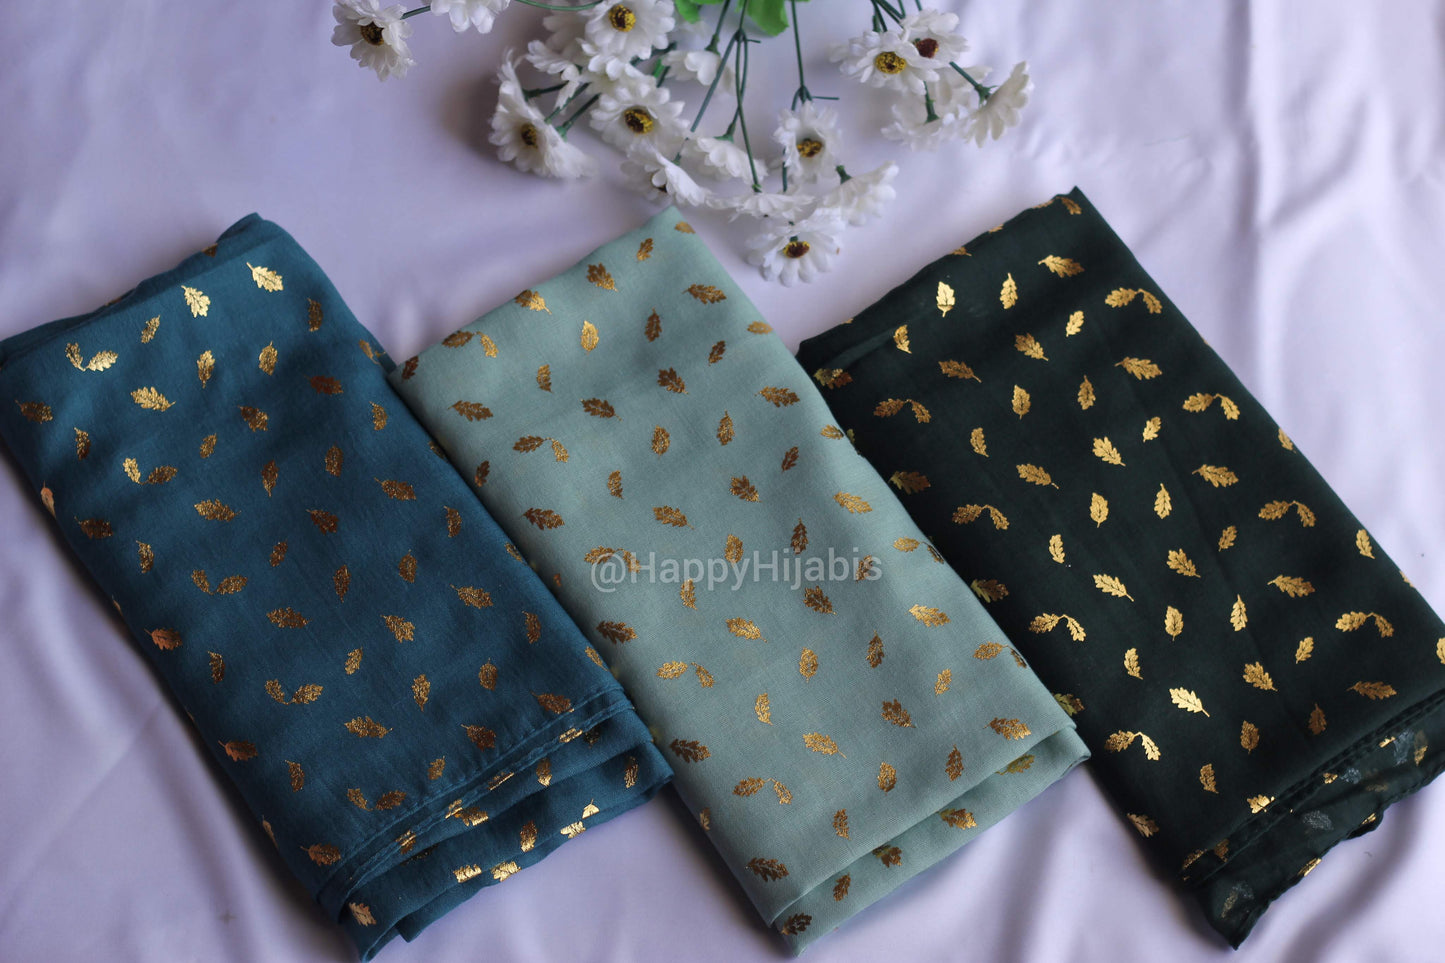 Gold-Foil Feathers Hijabs